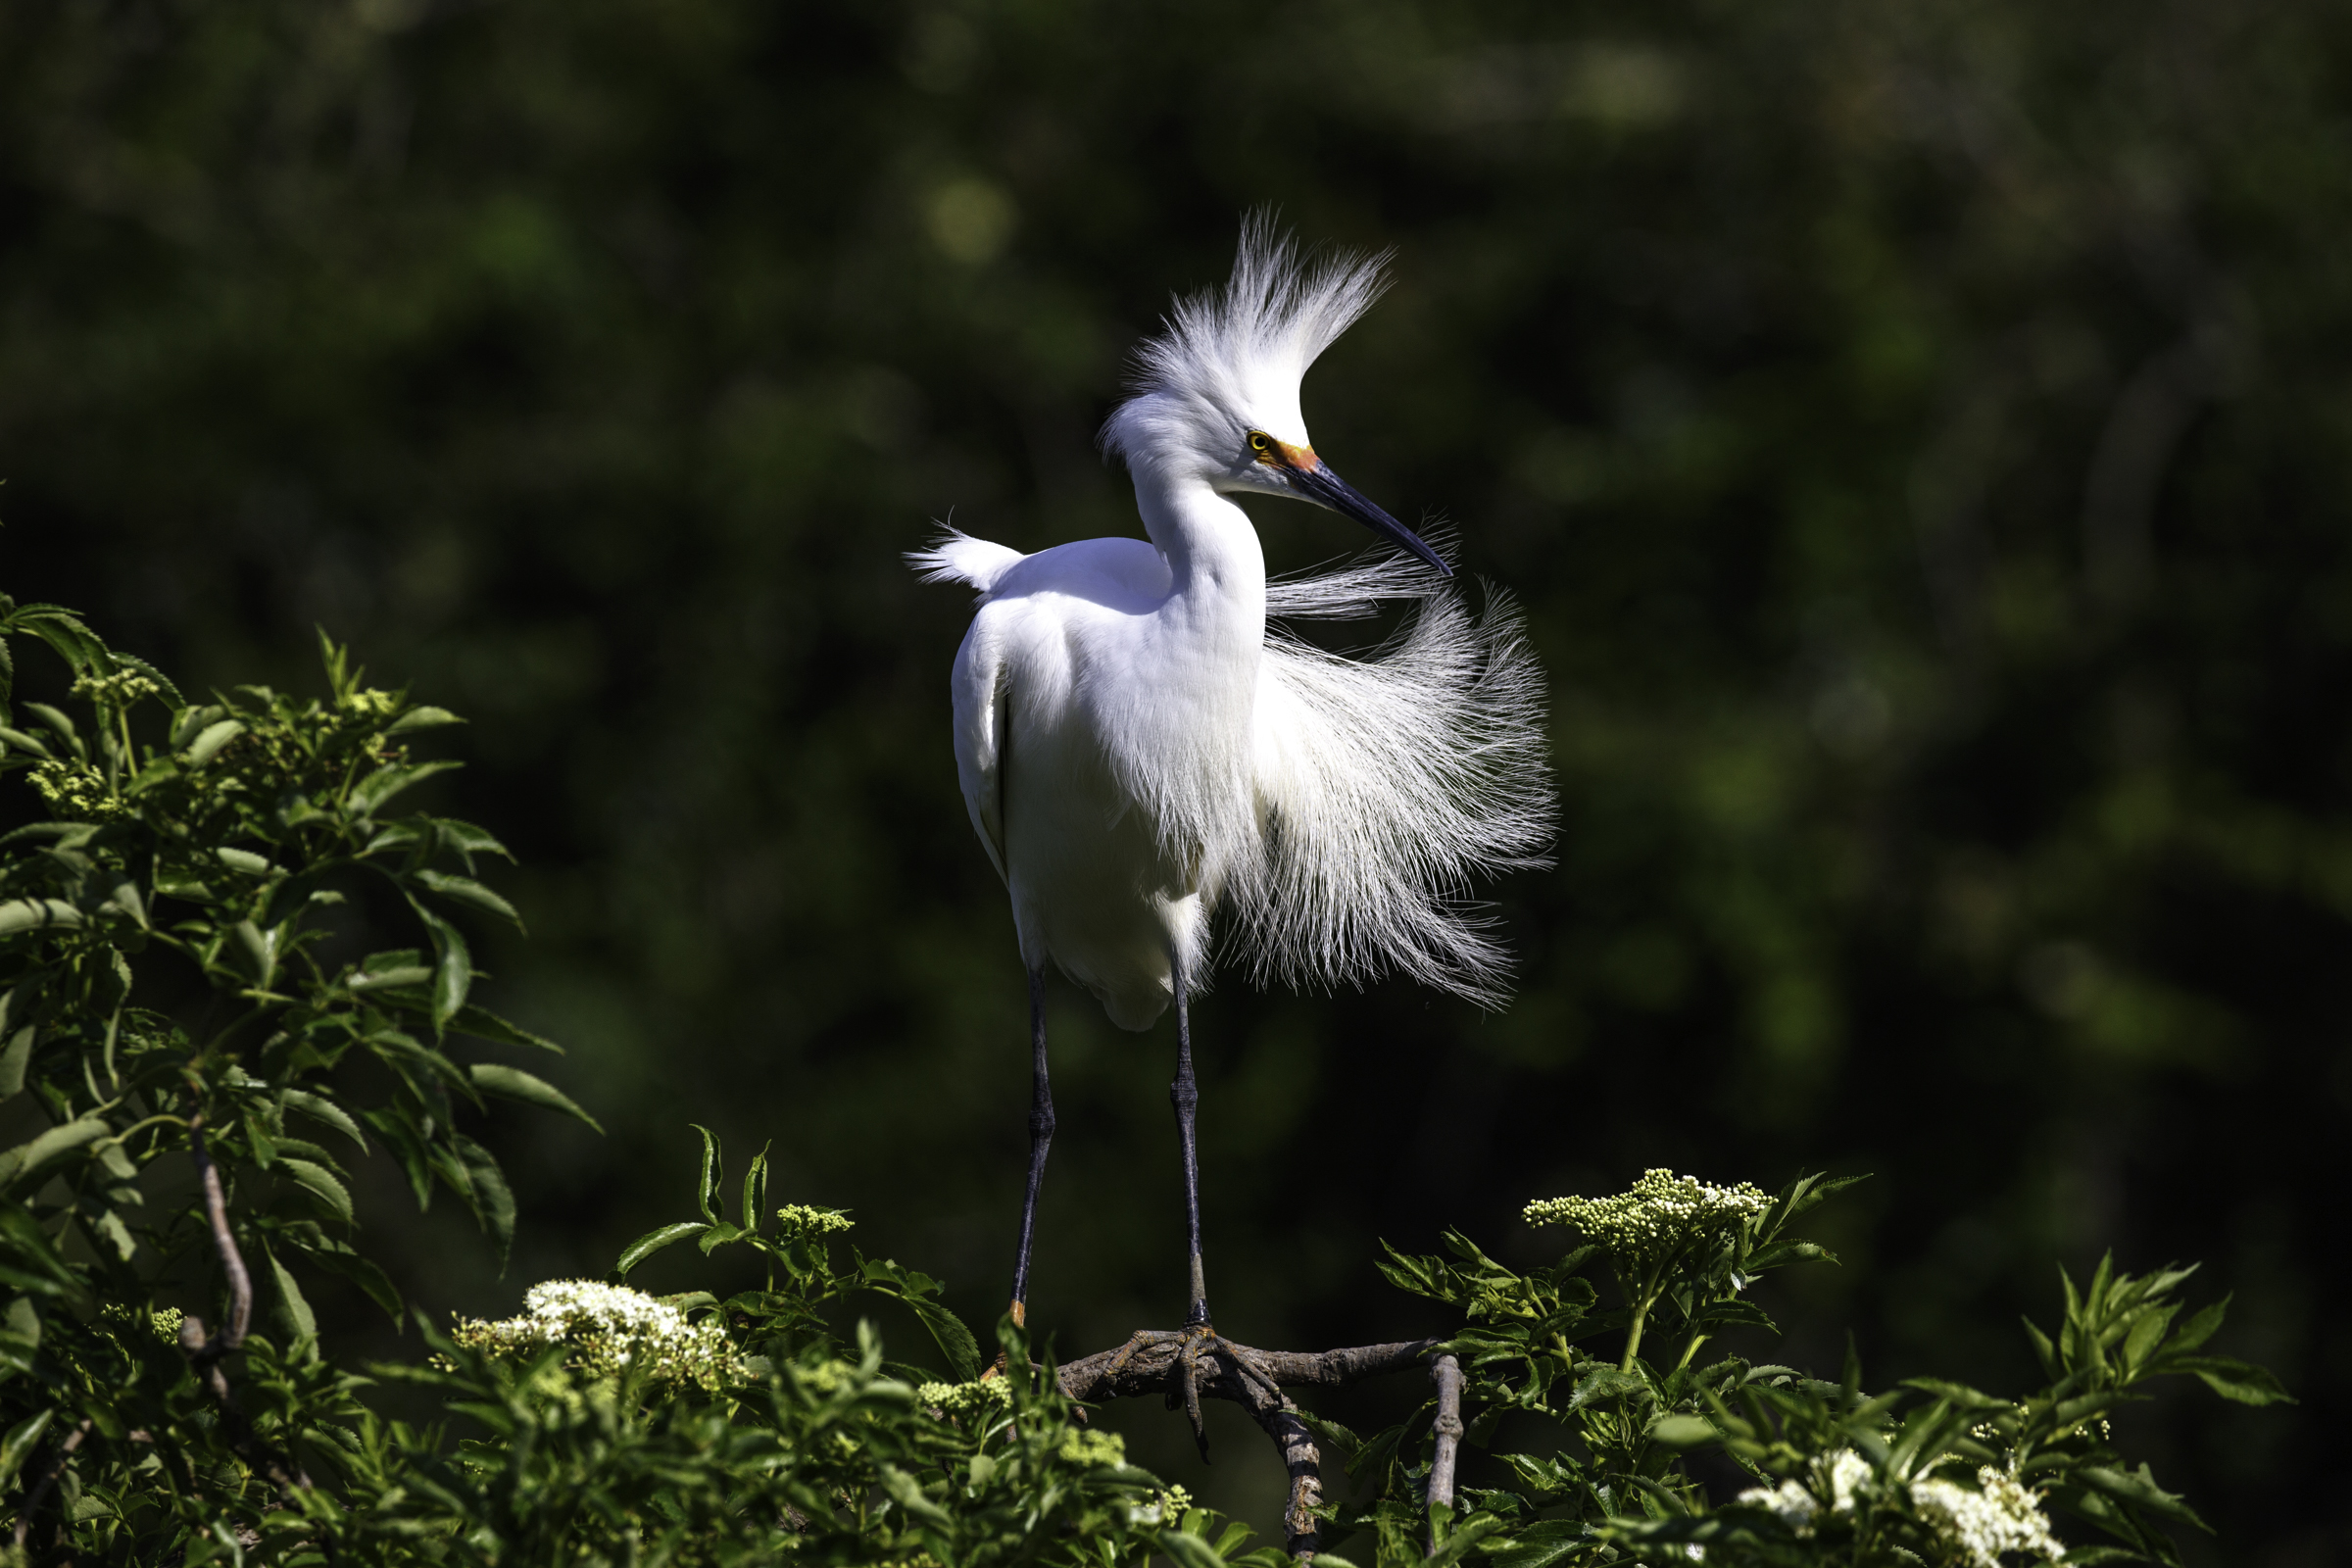 Snowy Egret with feathers blowing, standing on a tree branch, with a forest background. Photo: Tom Tobin/Audubon Photography Awards.